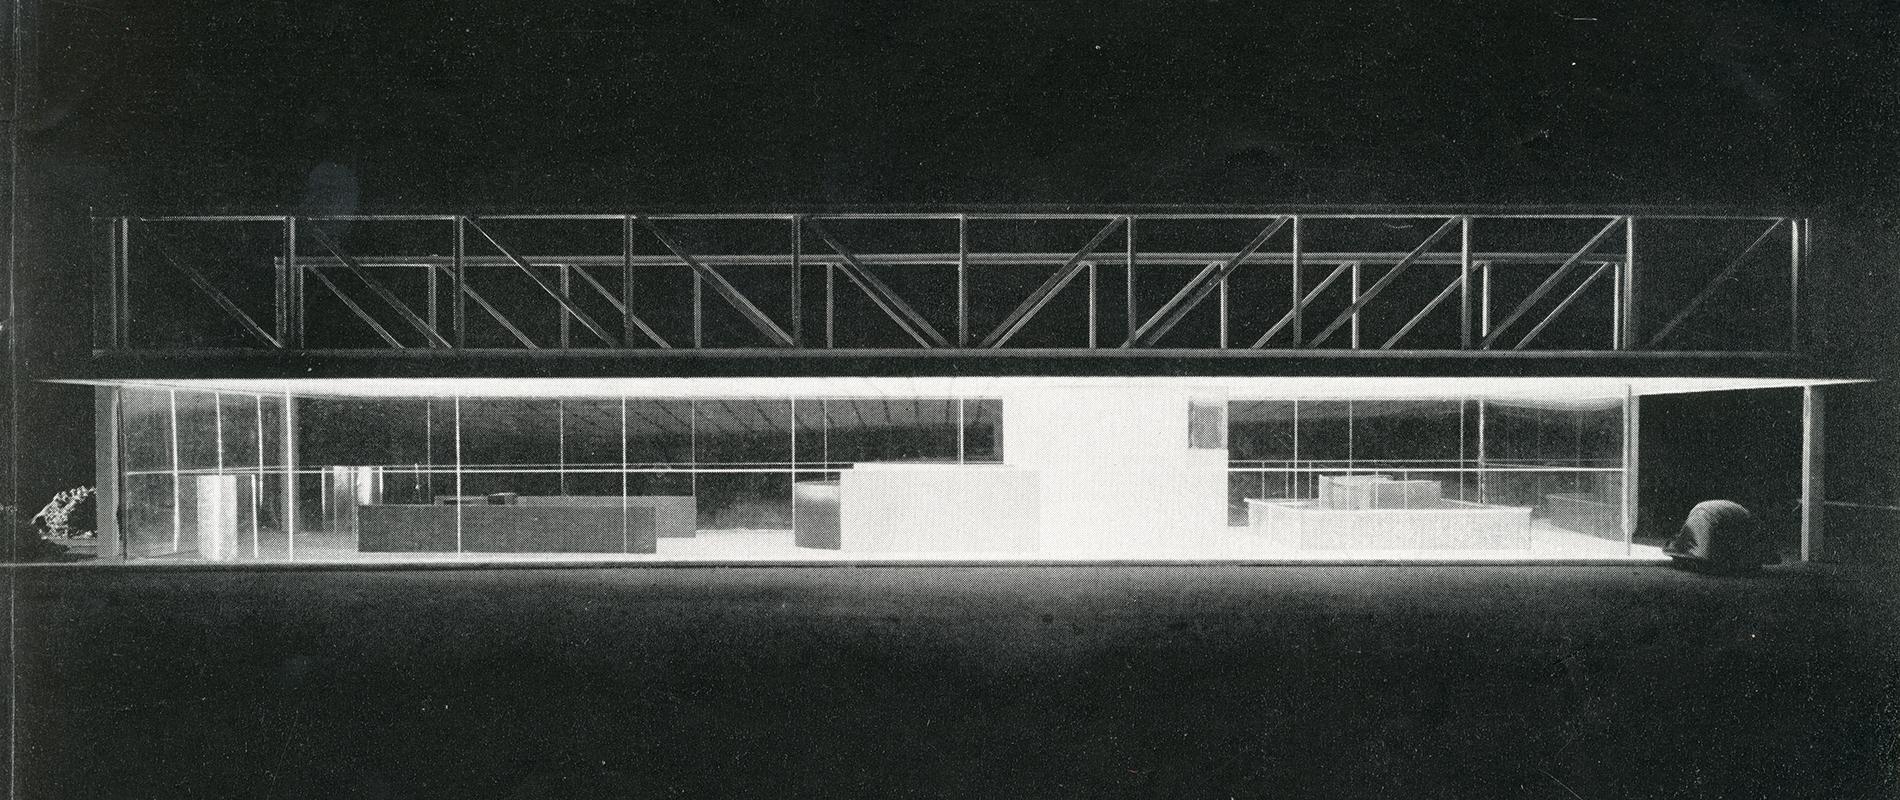 Mies van der Rohe. Arts and Architecture. Mar 1952, 31